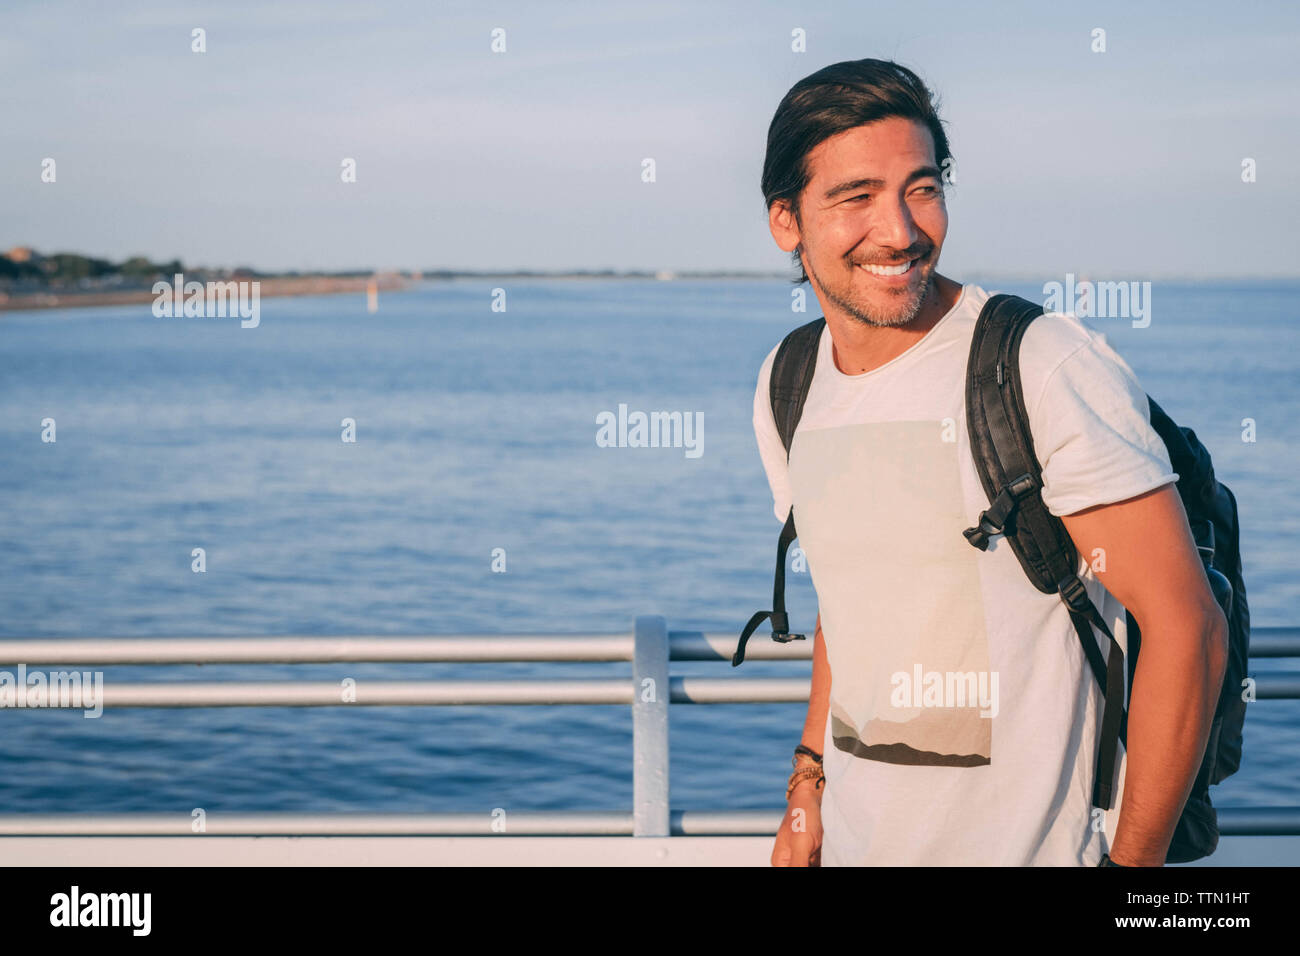 Brazilian laughing on a pier at the sunset with sea views Stock Photo